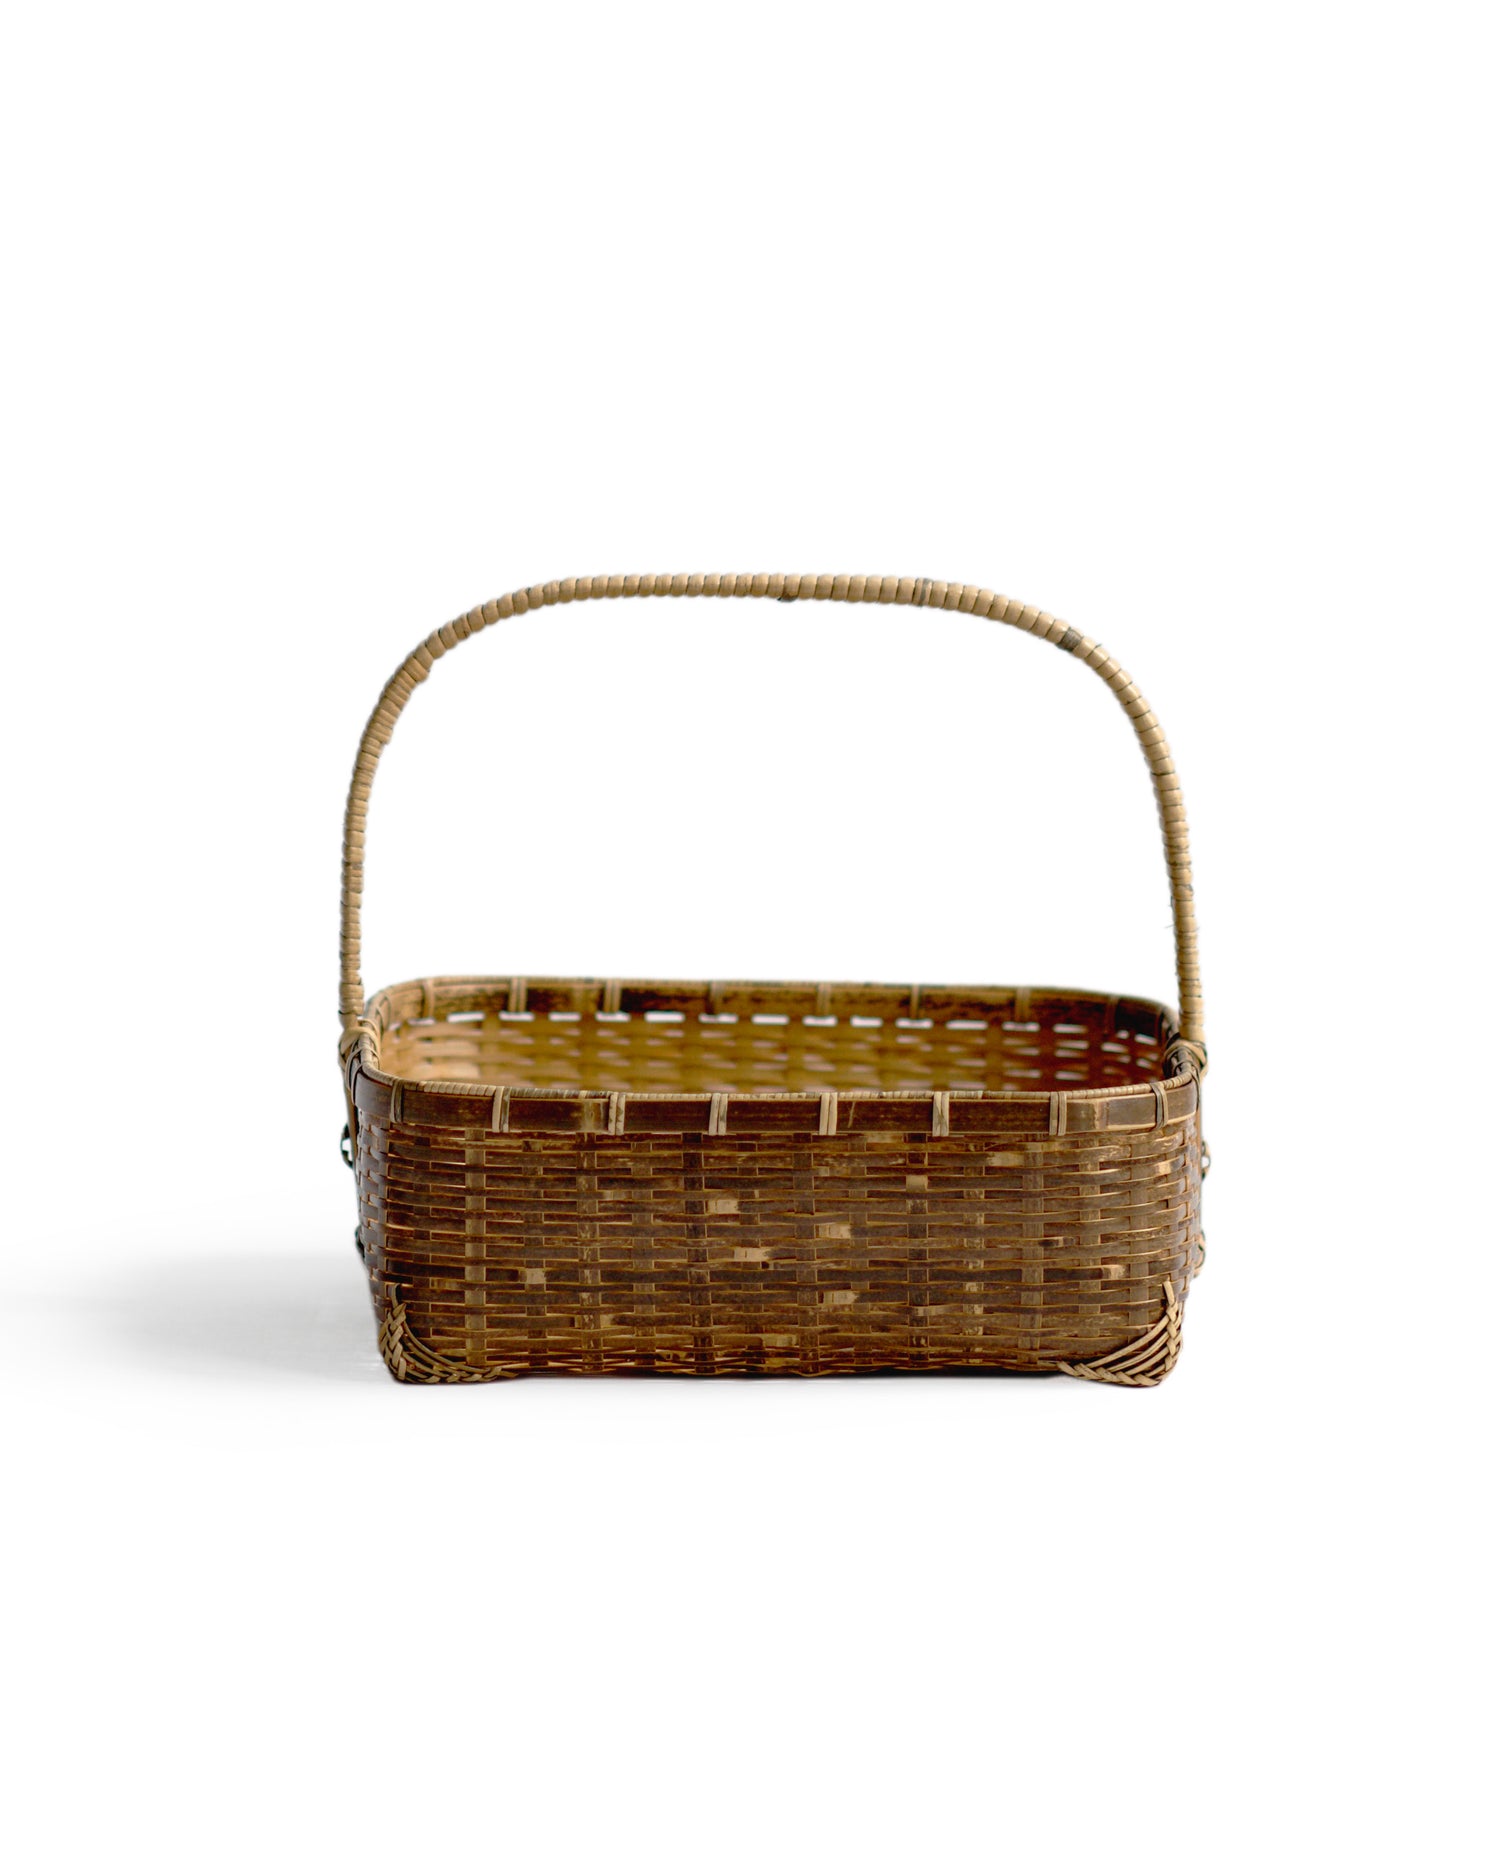 Silhouetted front image of square toradake bread basket with handle by Kohchosai Kosuga against white background.